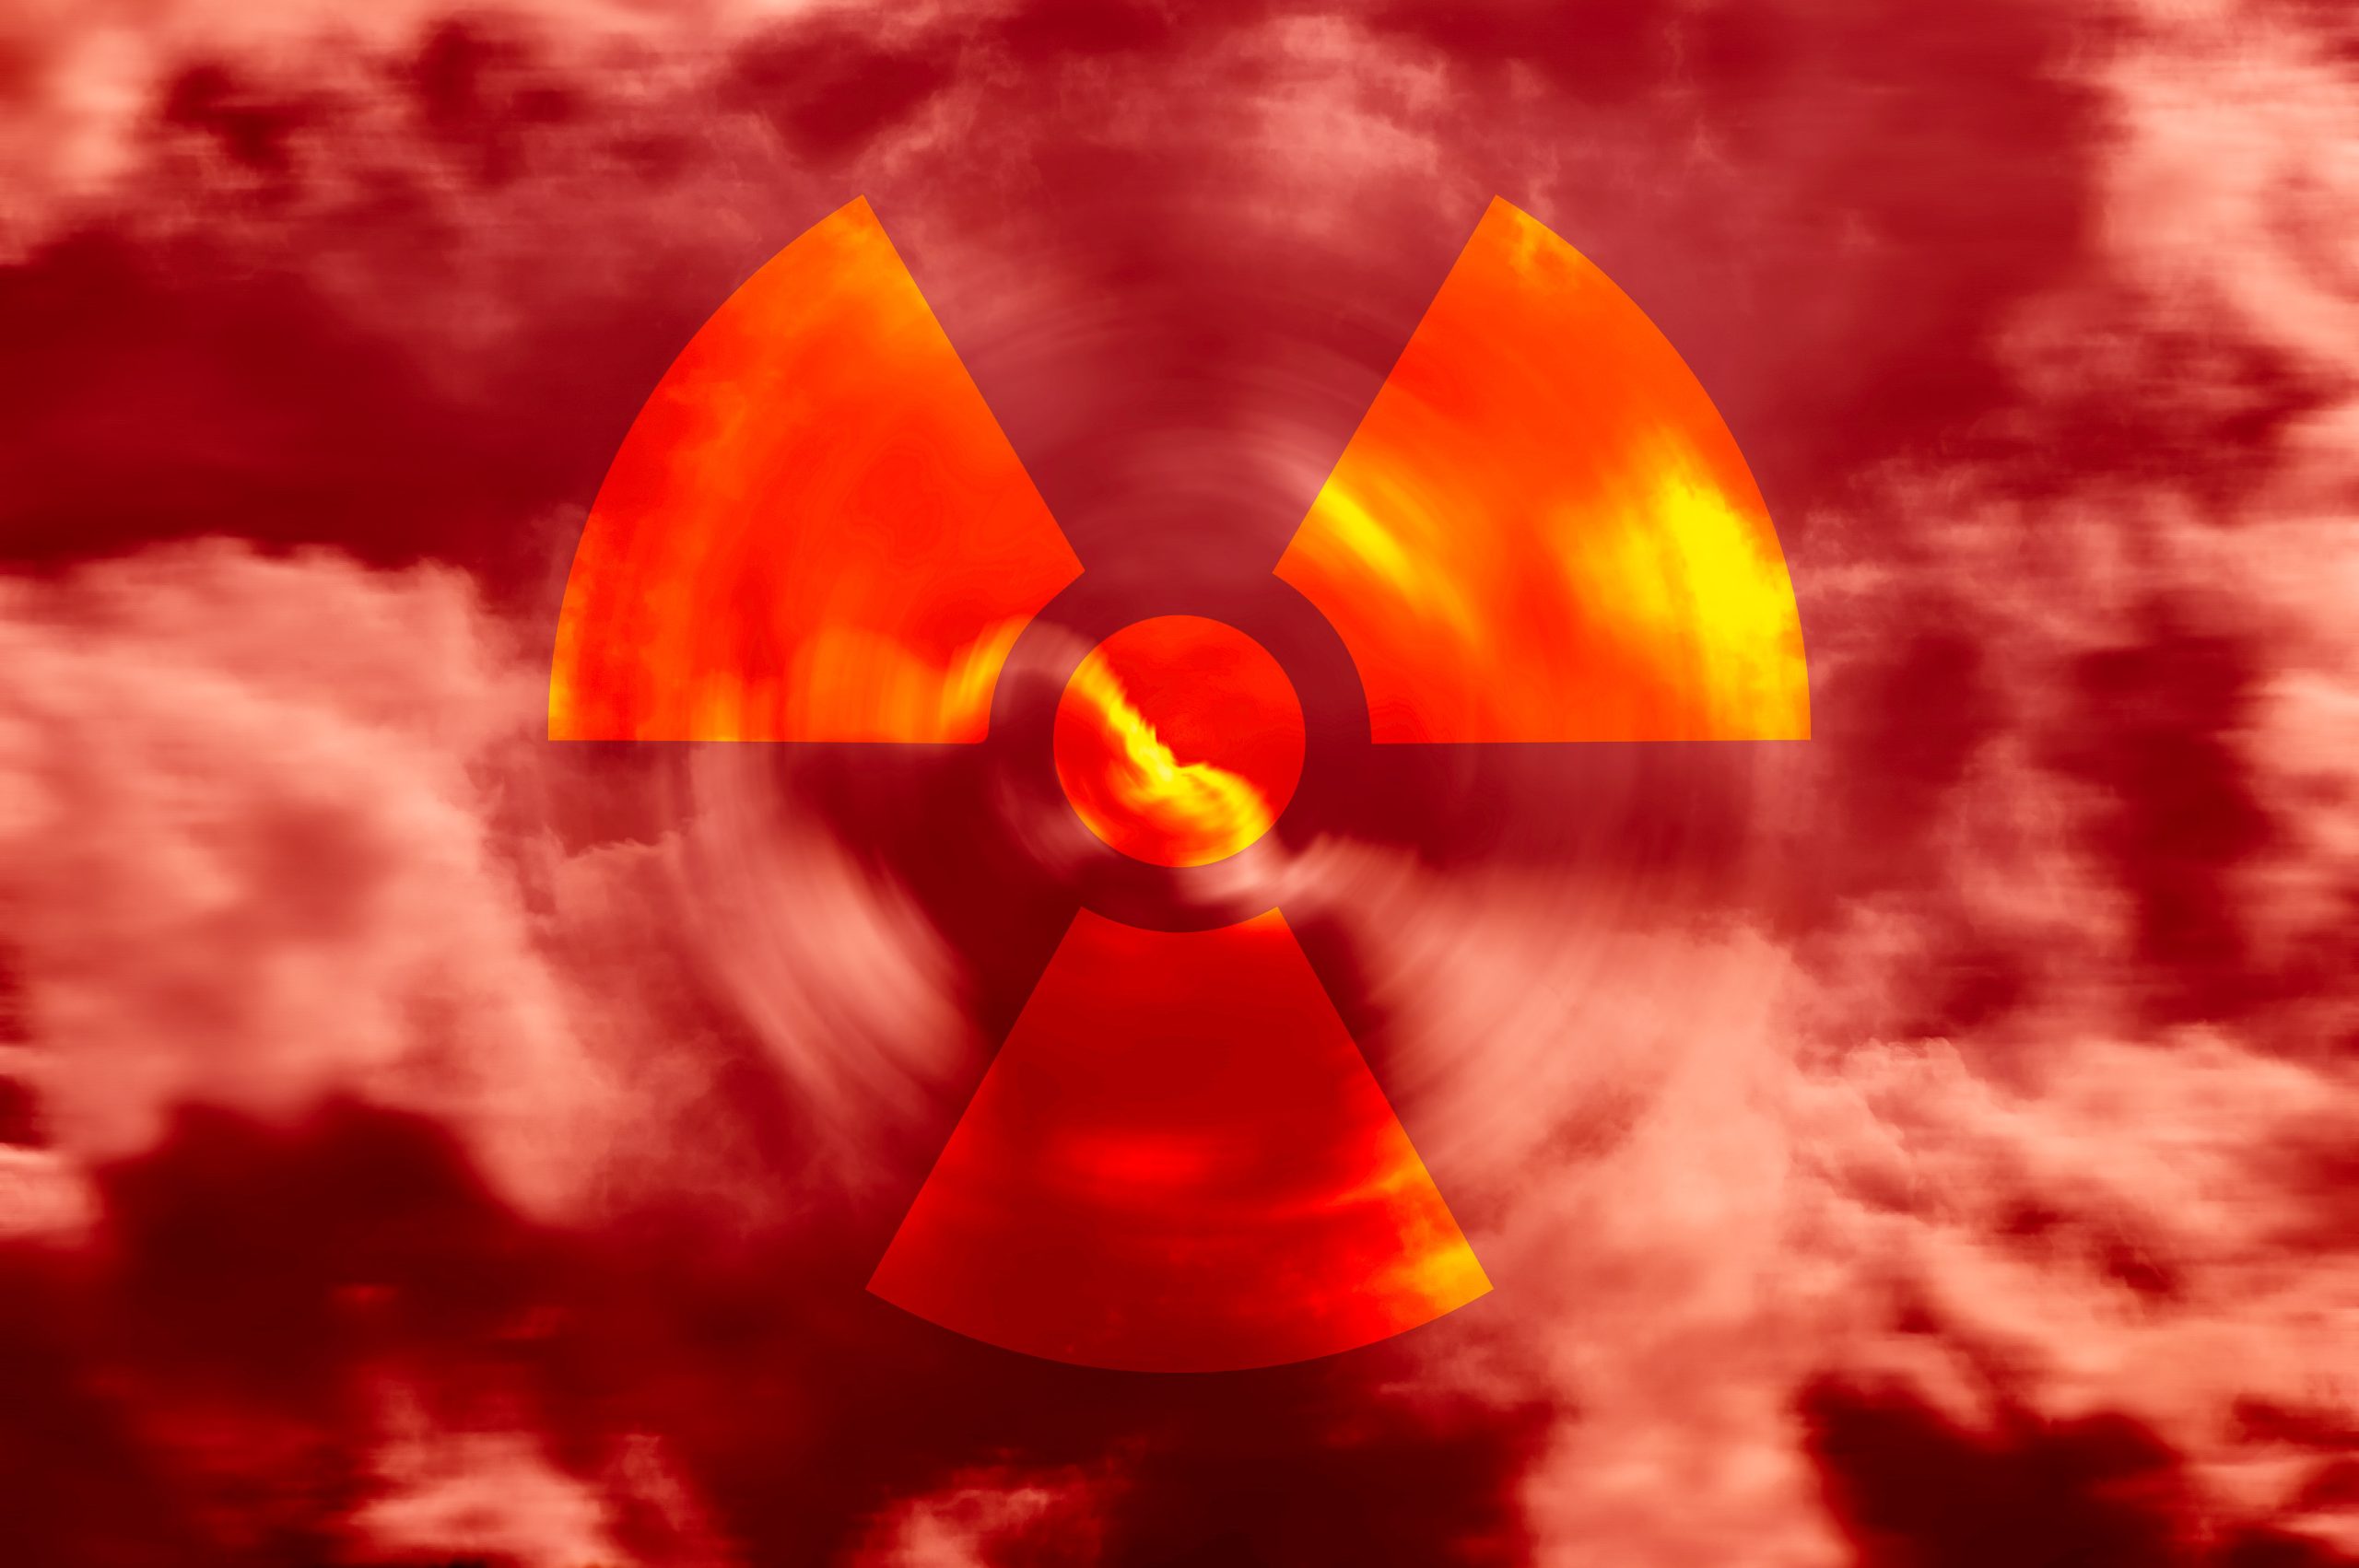 Radioactive symbol in a red sky with clouds. YAYIMAGES.